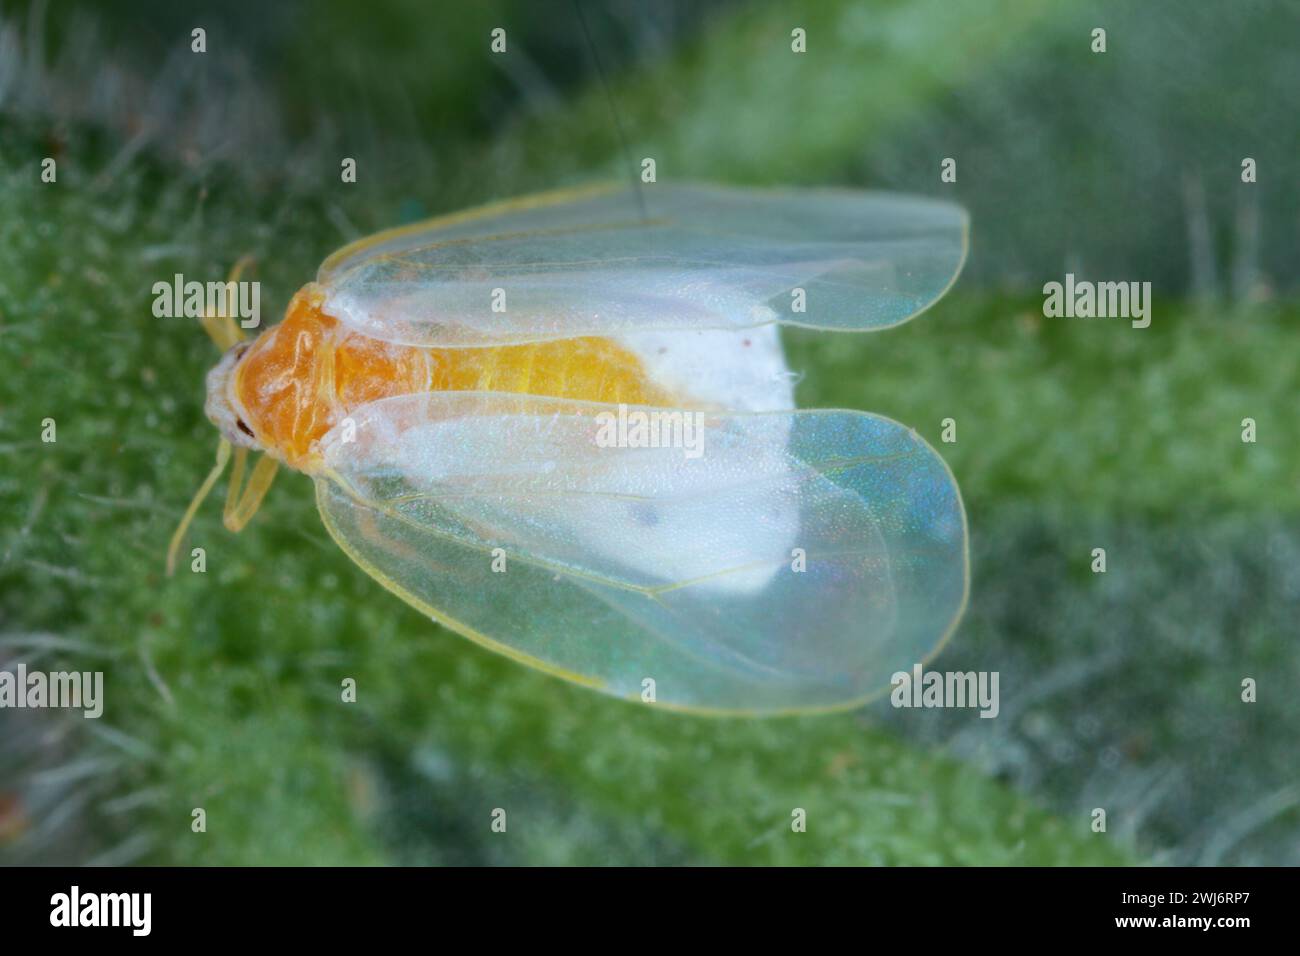 Aleurodicus whitefly, is a small white sap-sucking insect, a true bug in the order Hemiptera. Adult. Stock Photo